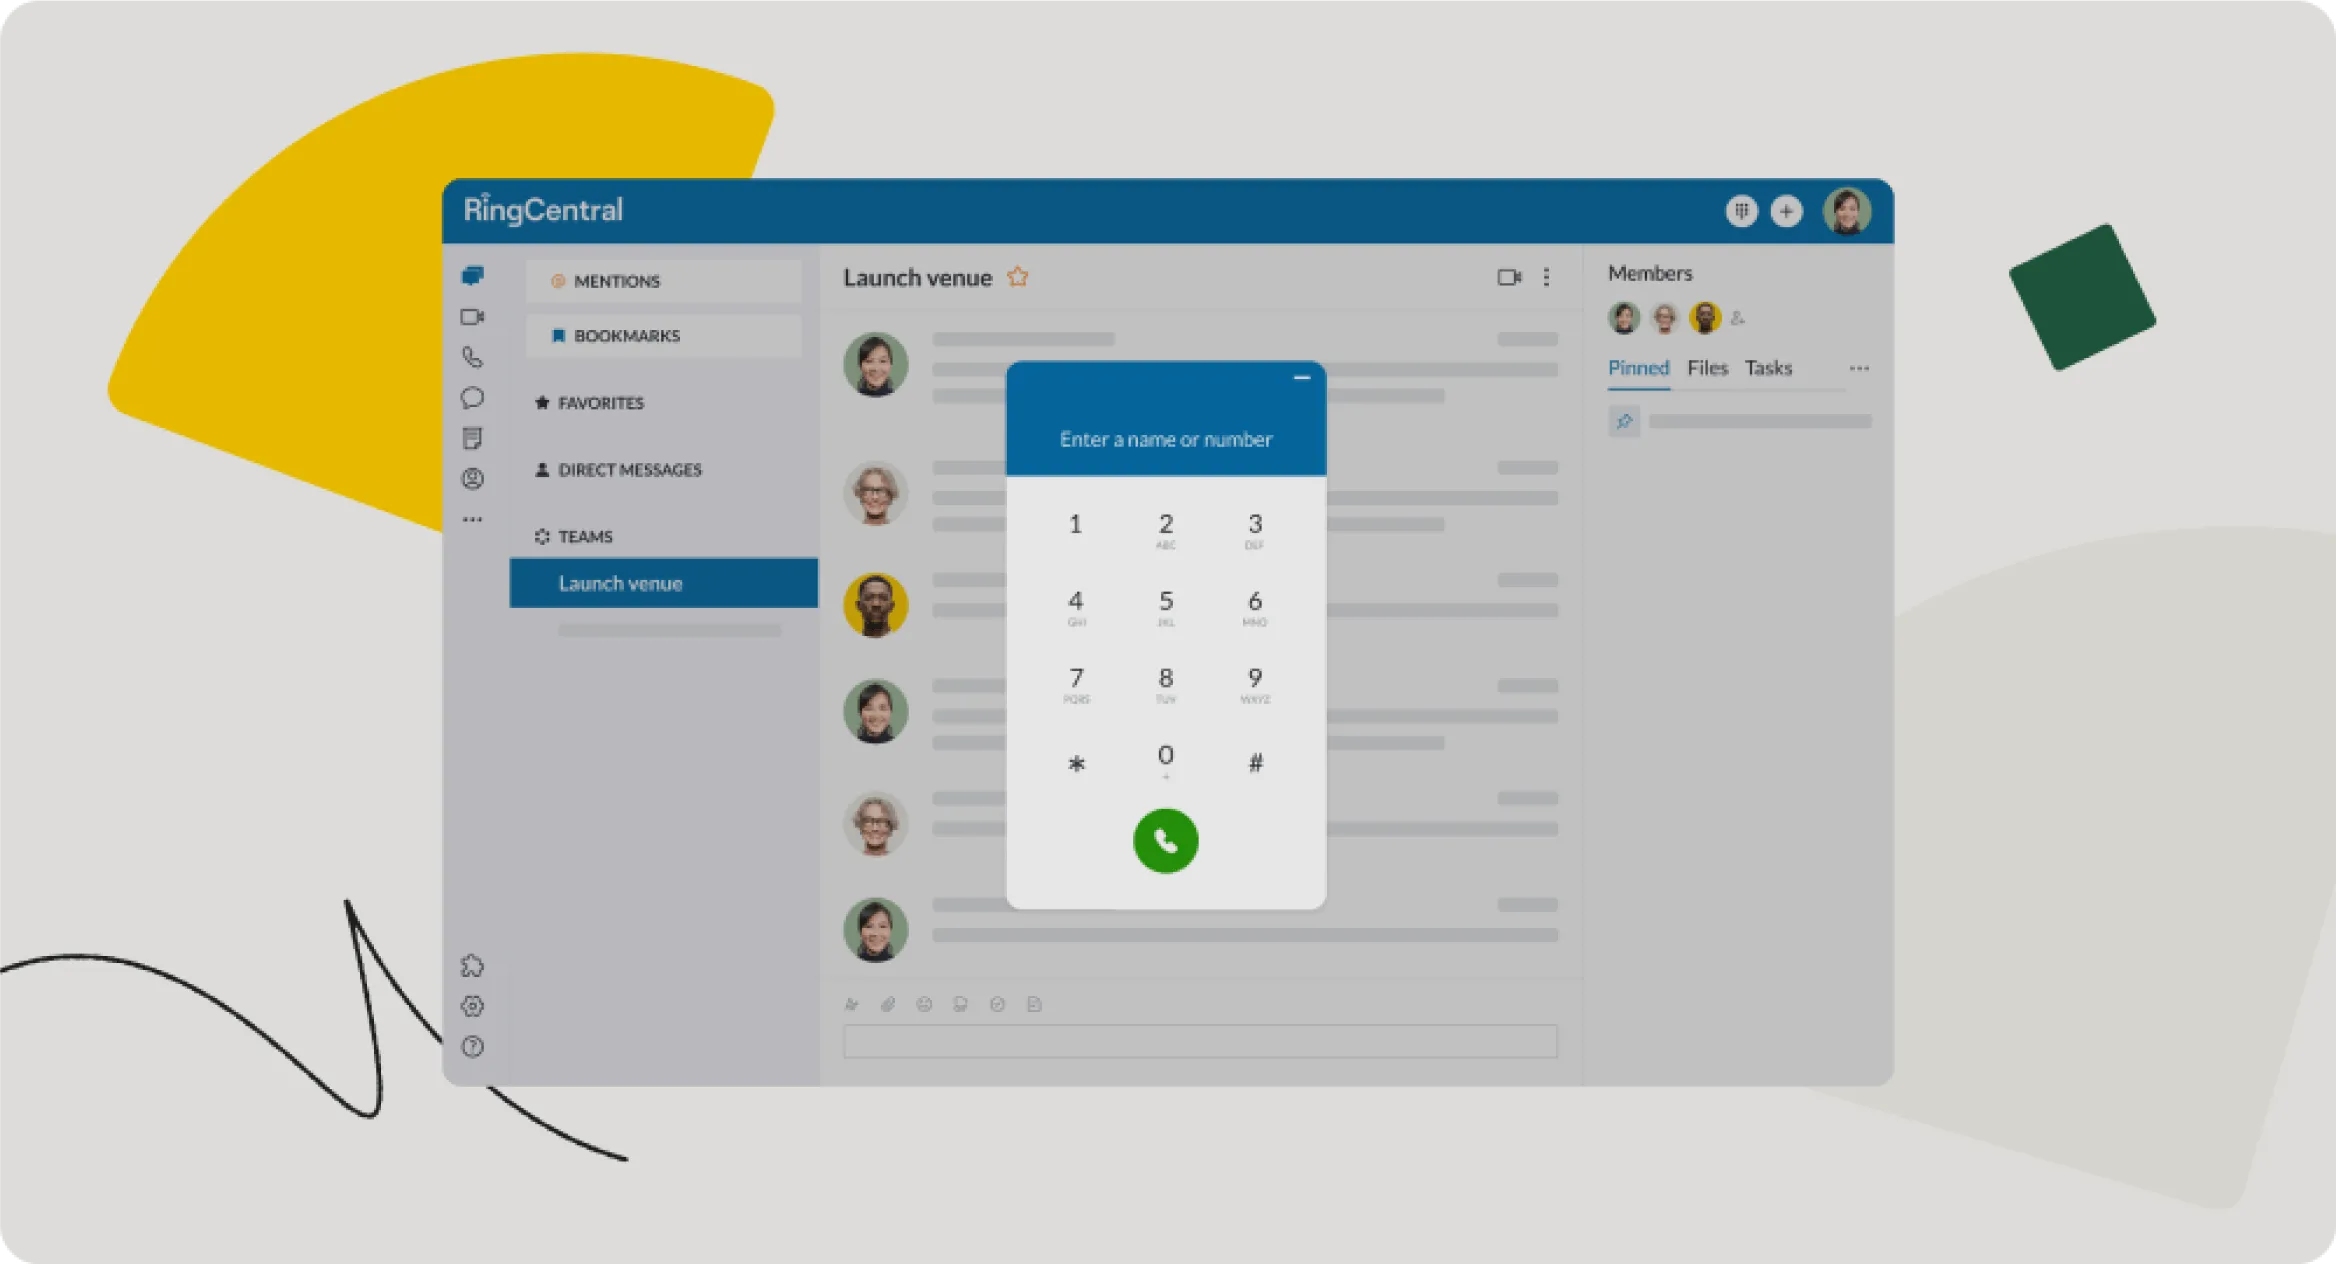 New at RingCentral: A better desktop softphone experience